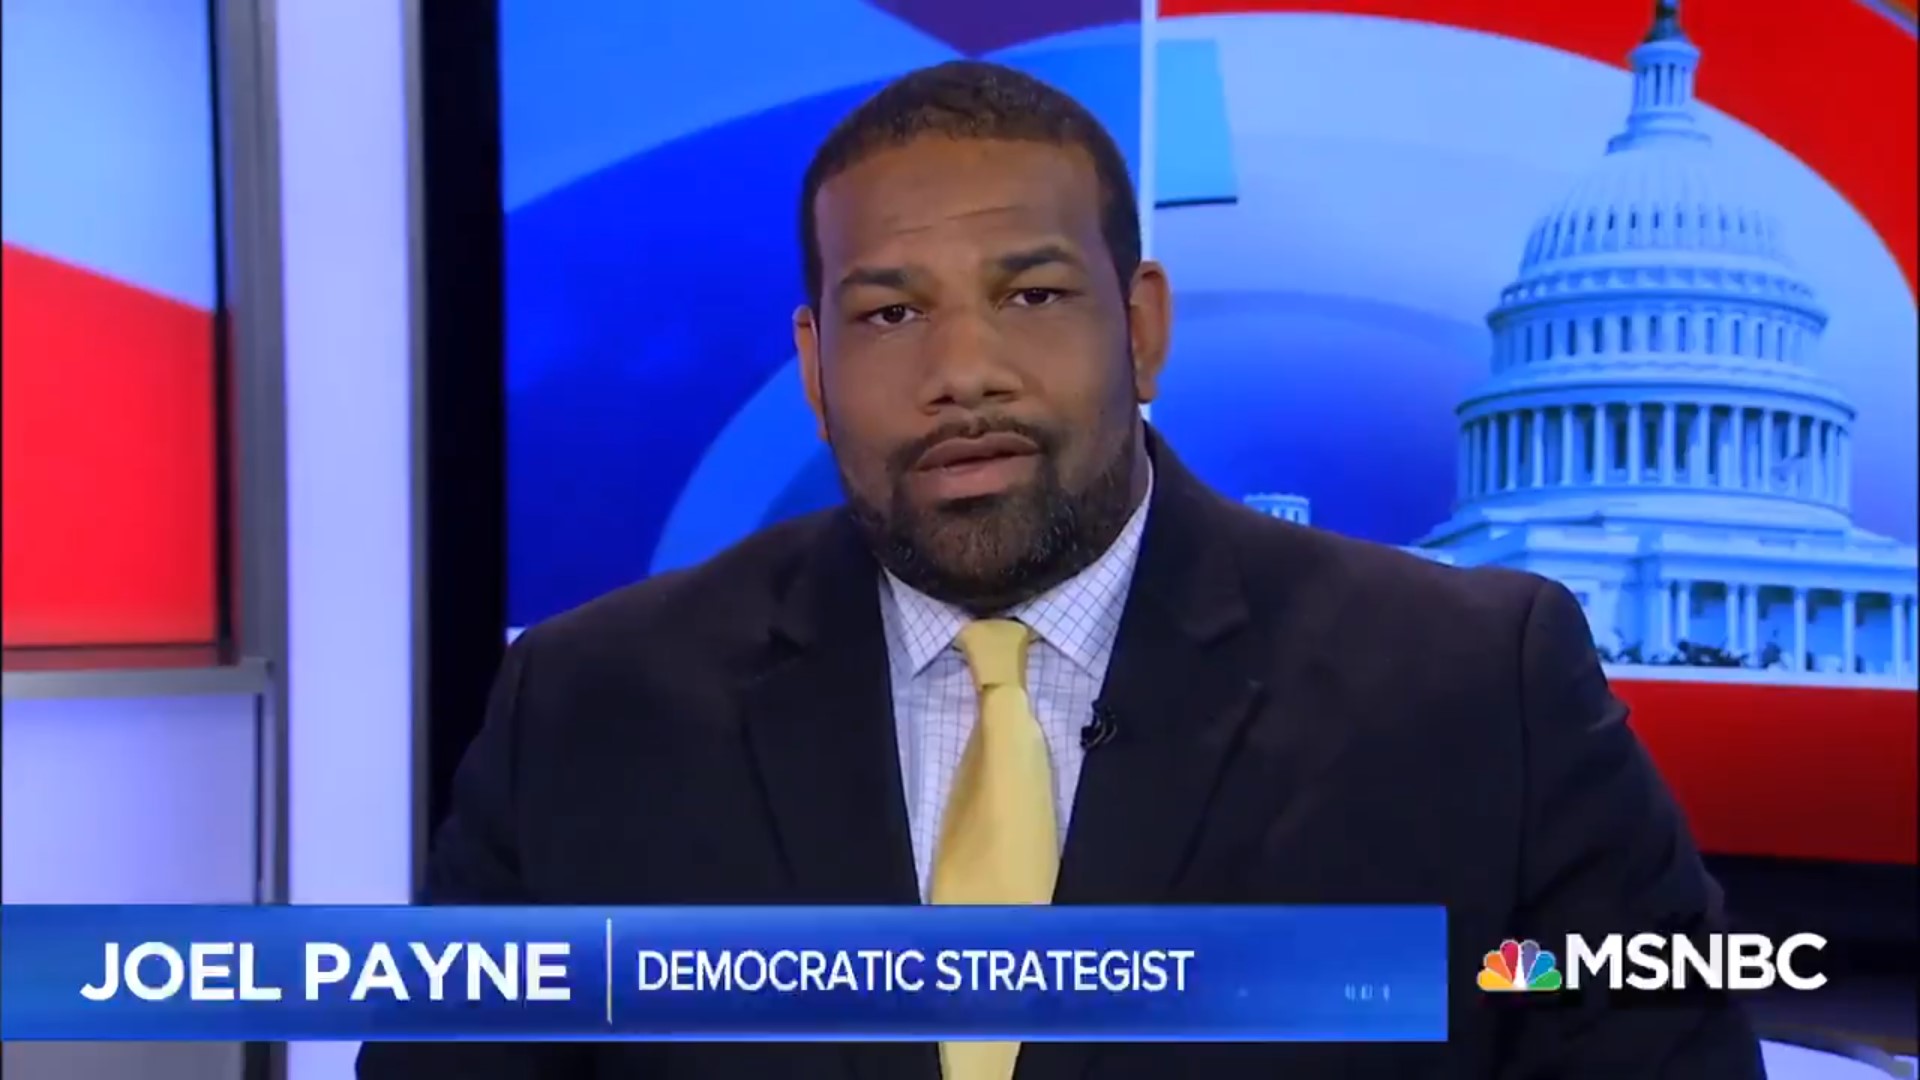 Dem Strategist Reacts To Bossie’s Racist Comment To Him: ‘Par For The Course’ With Trump Supporters